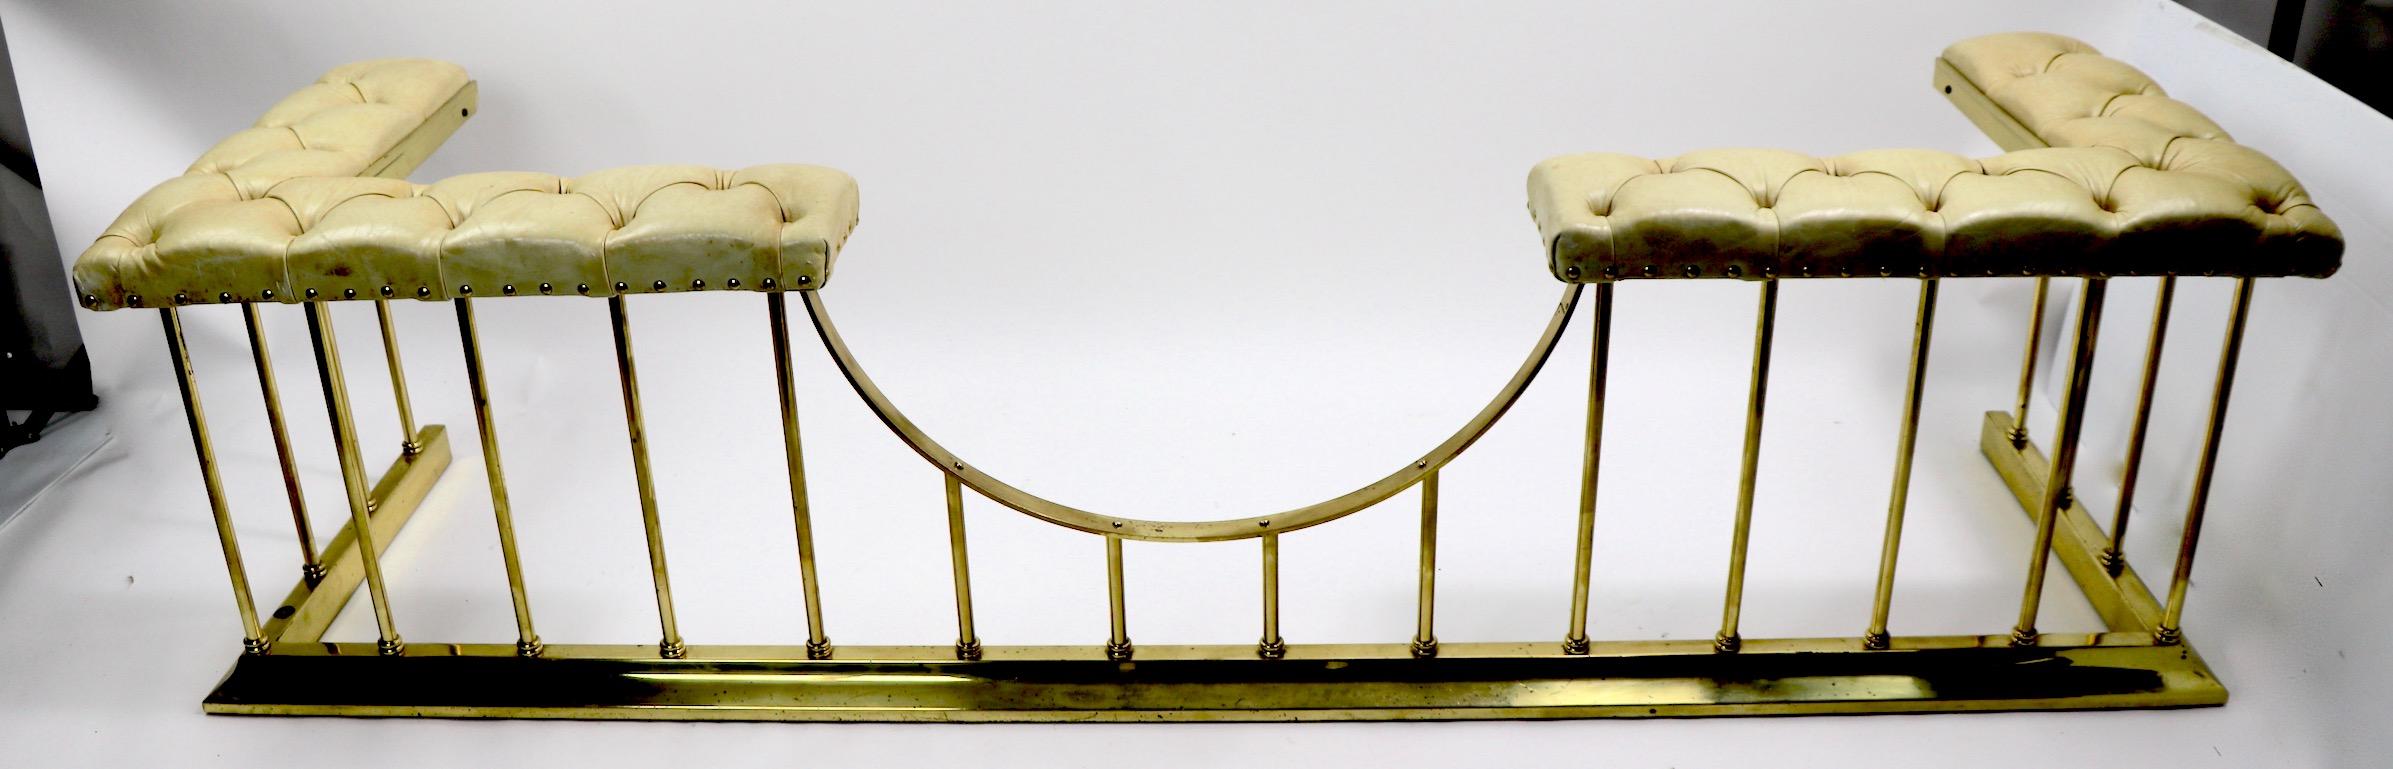 American Large Scale Bench Club Fender in Brass and Leather